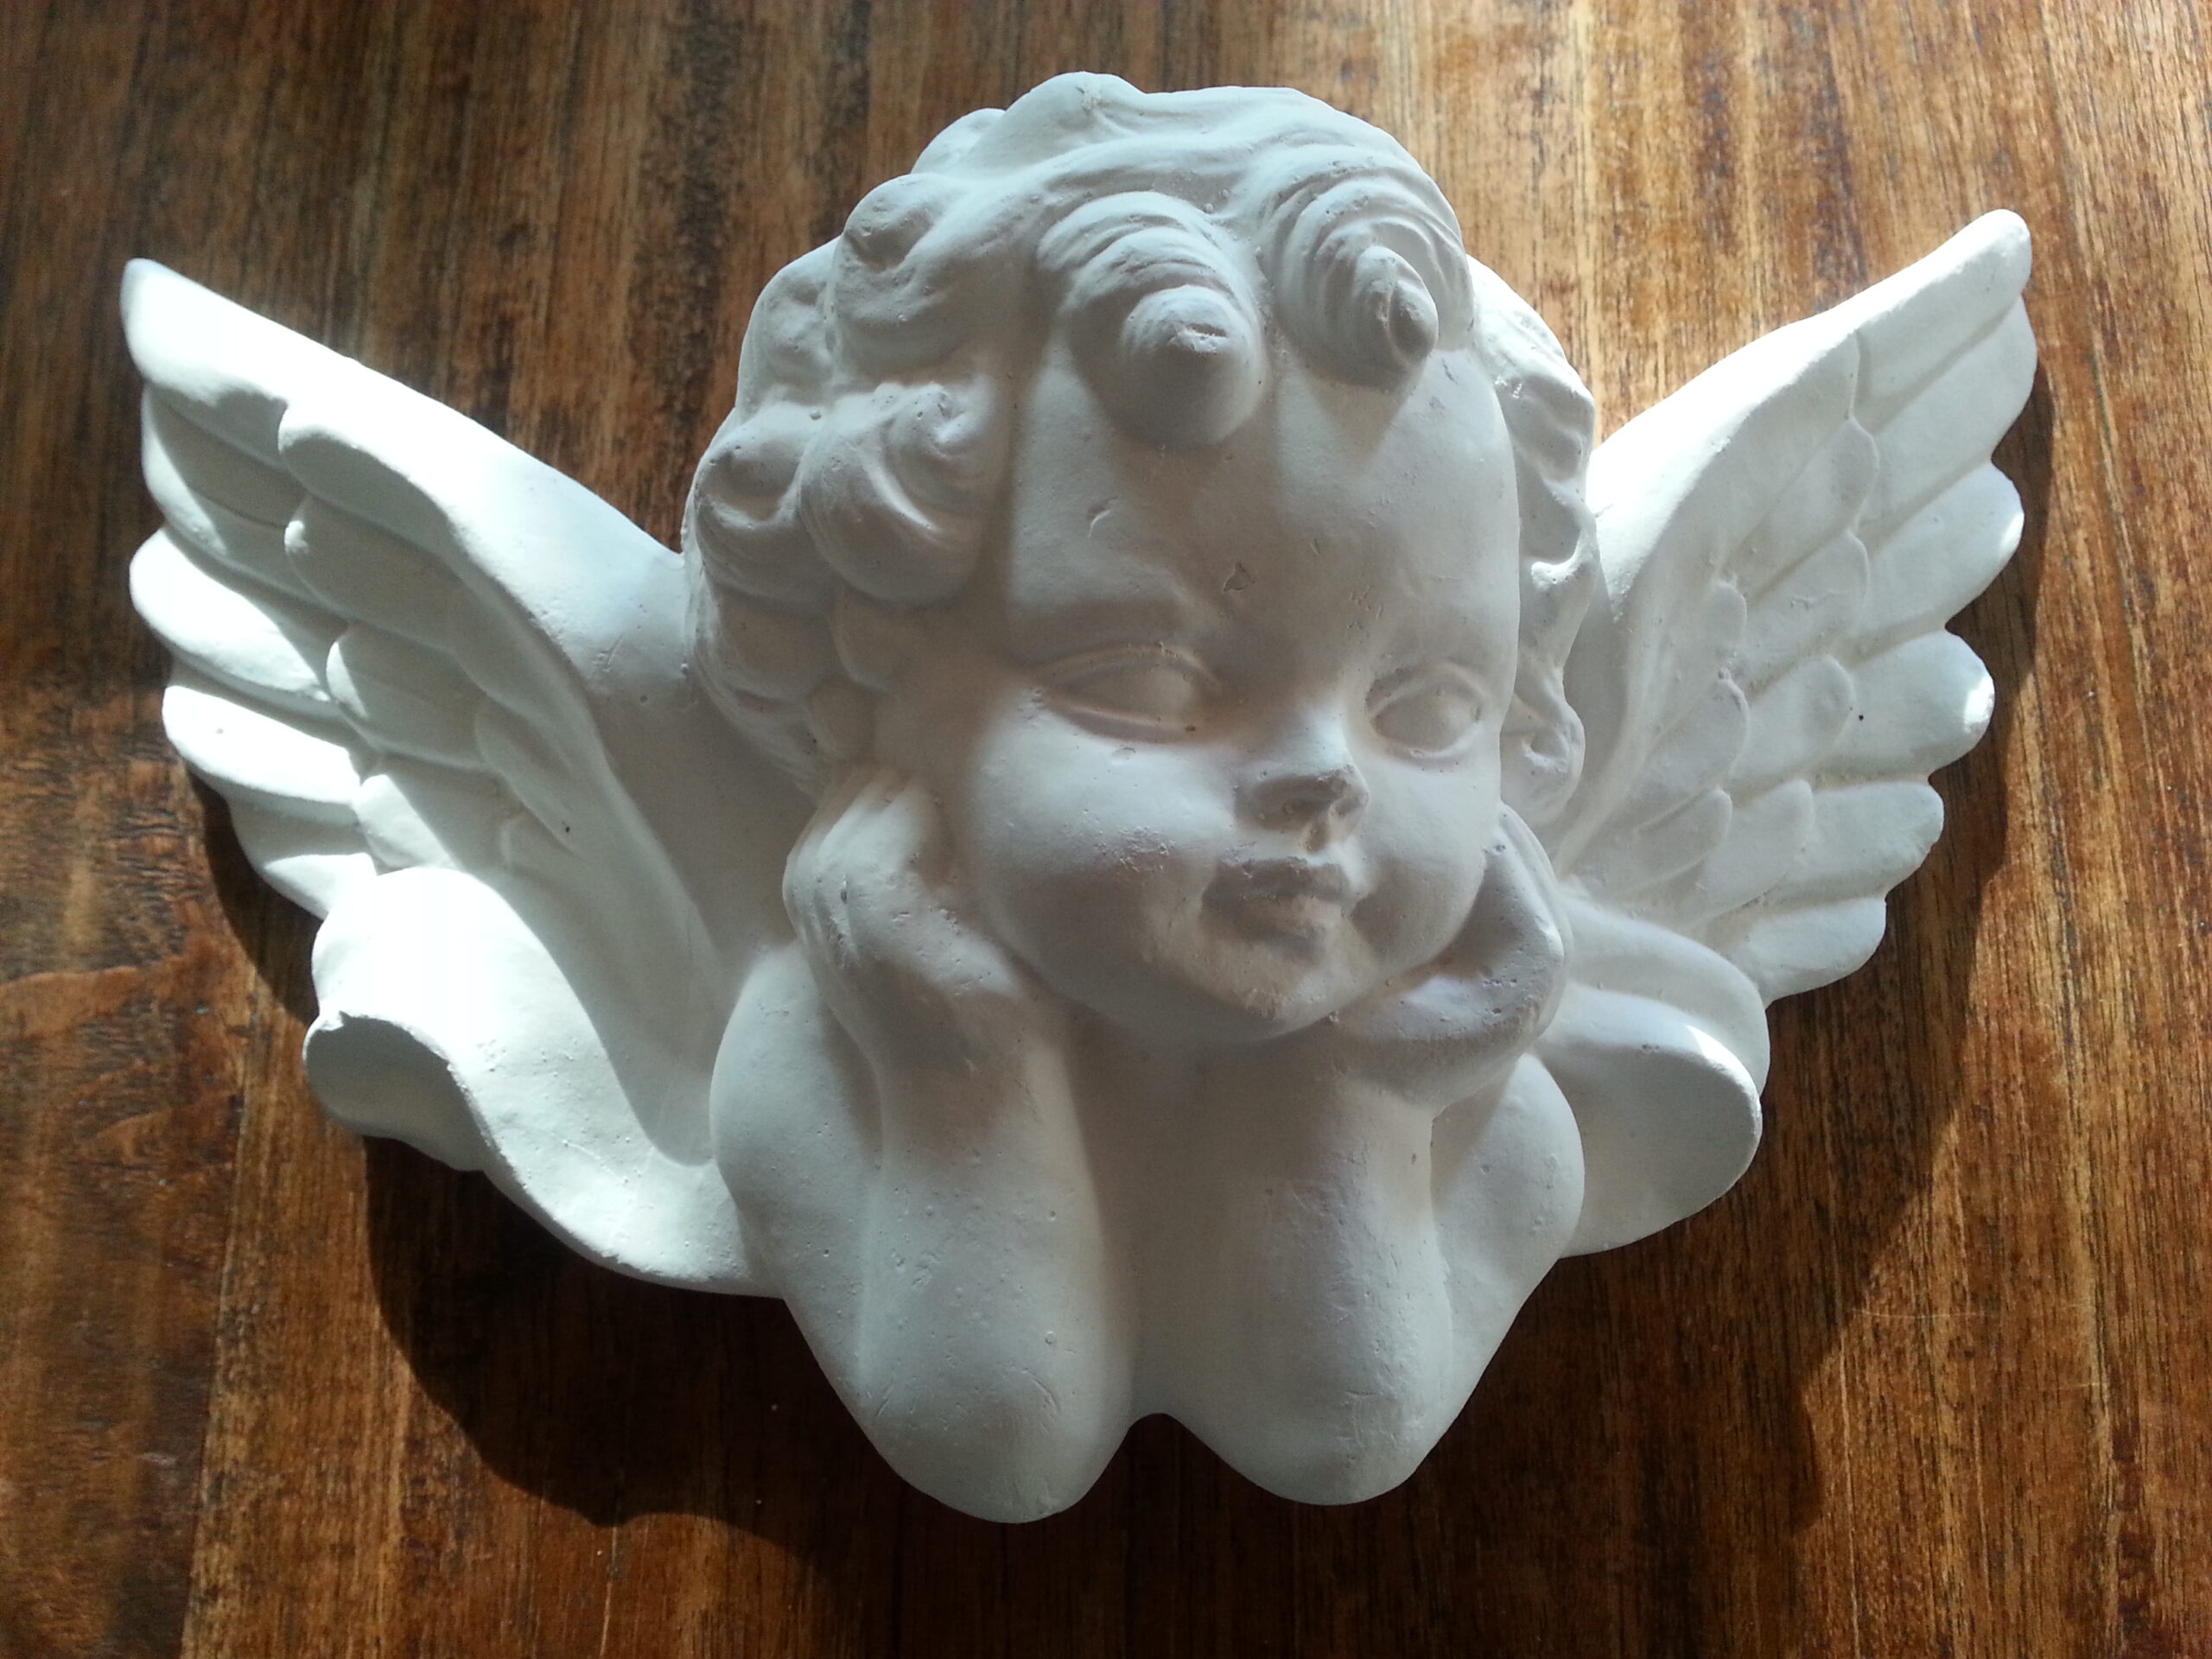 1 LONG ARCHITECTURAL ORNATE PLASTER CHERUB ANGEL FACE WALL DECOR PLAQUE MOULDING 